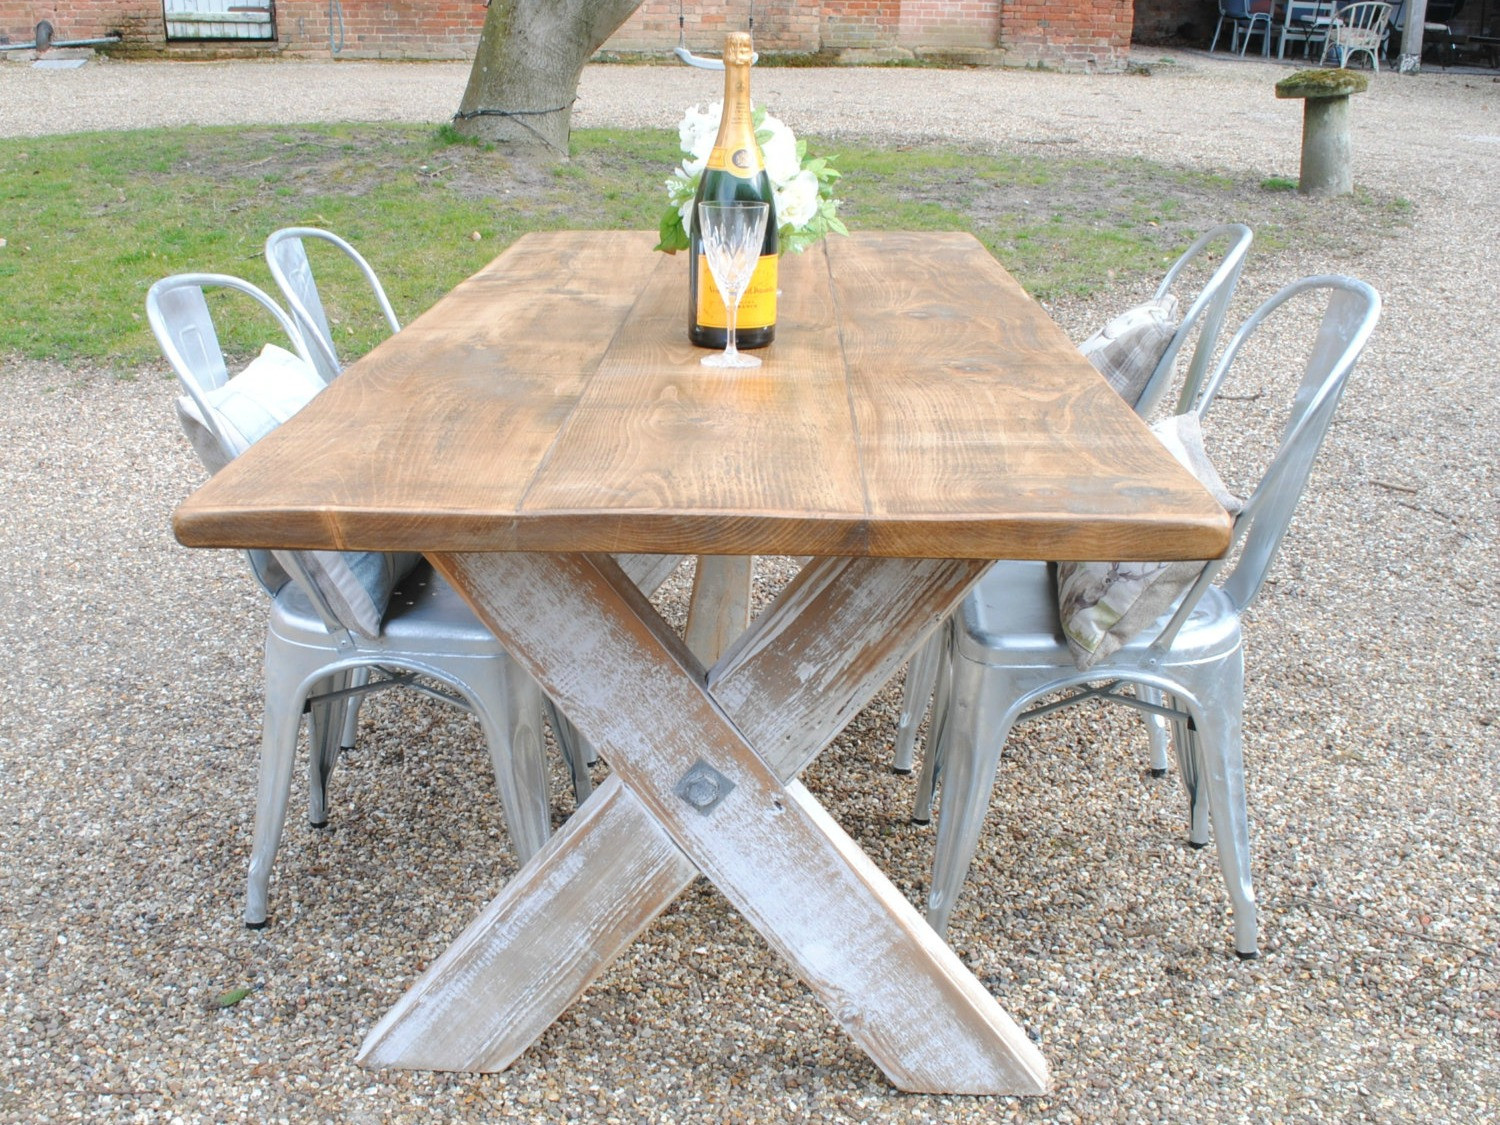 Rustic Kitchen Tables With Bench
 Tom Marsh